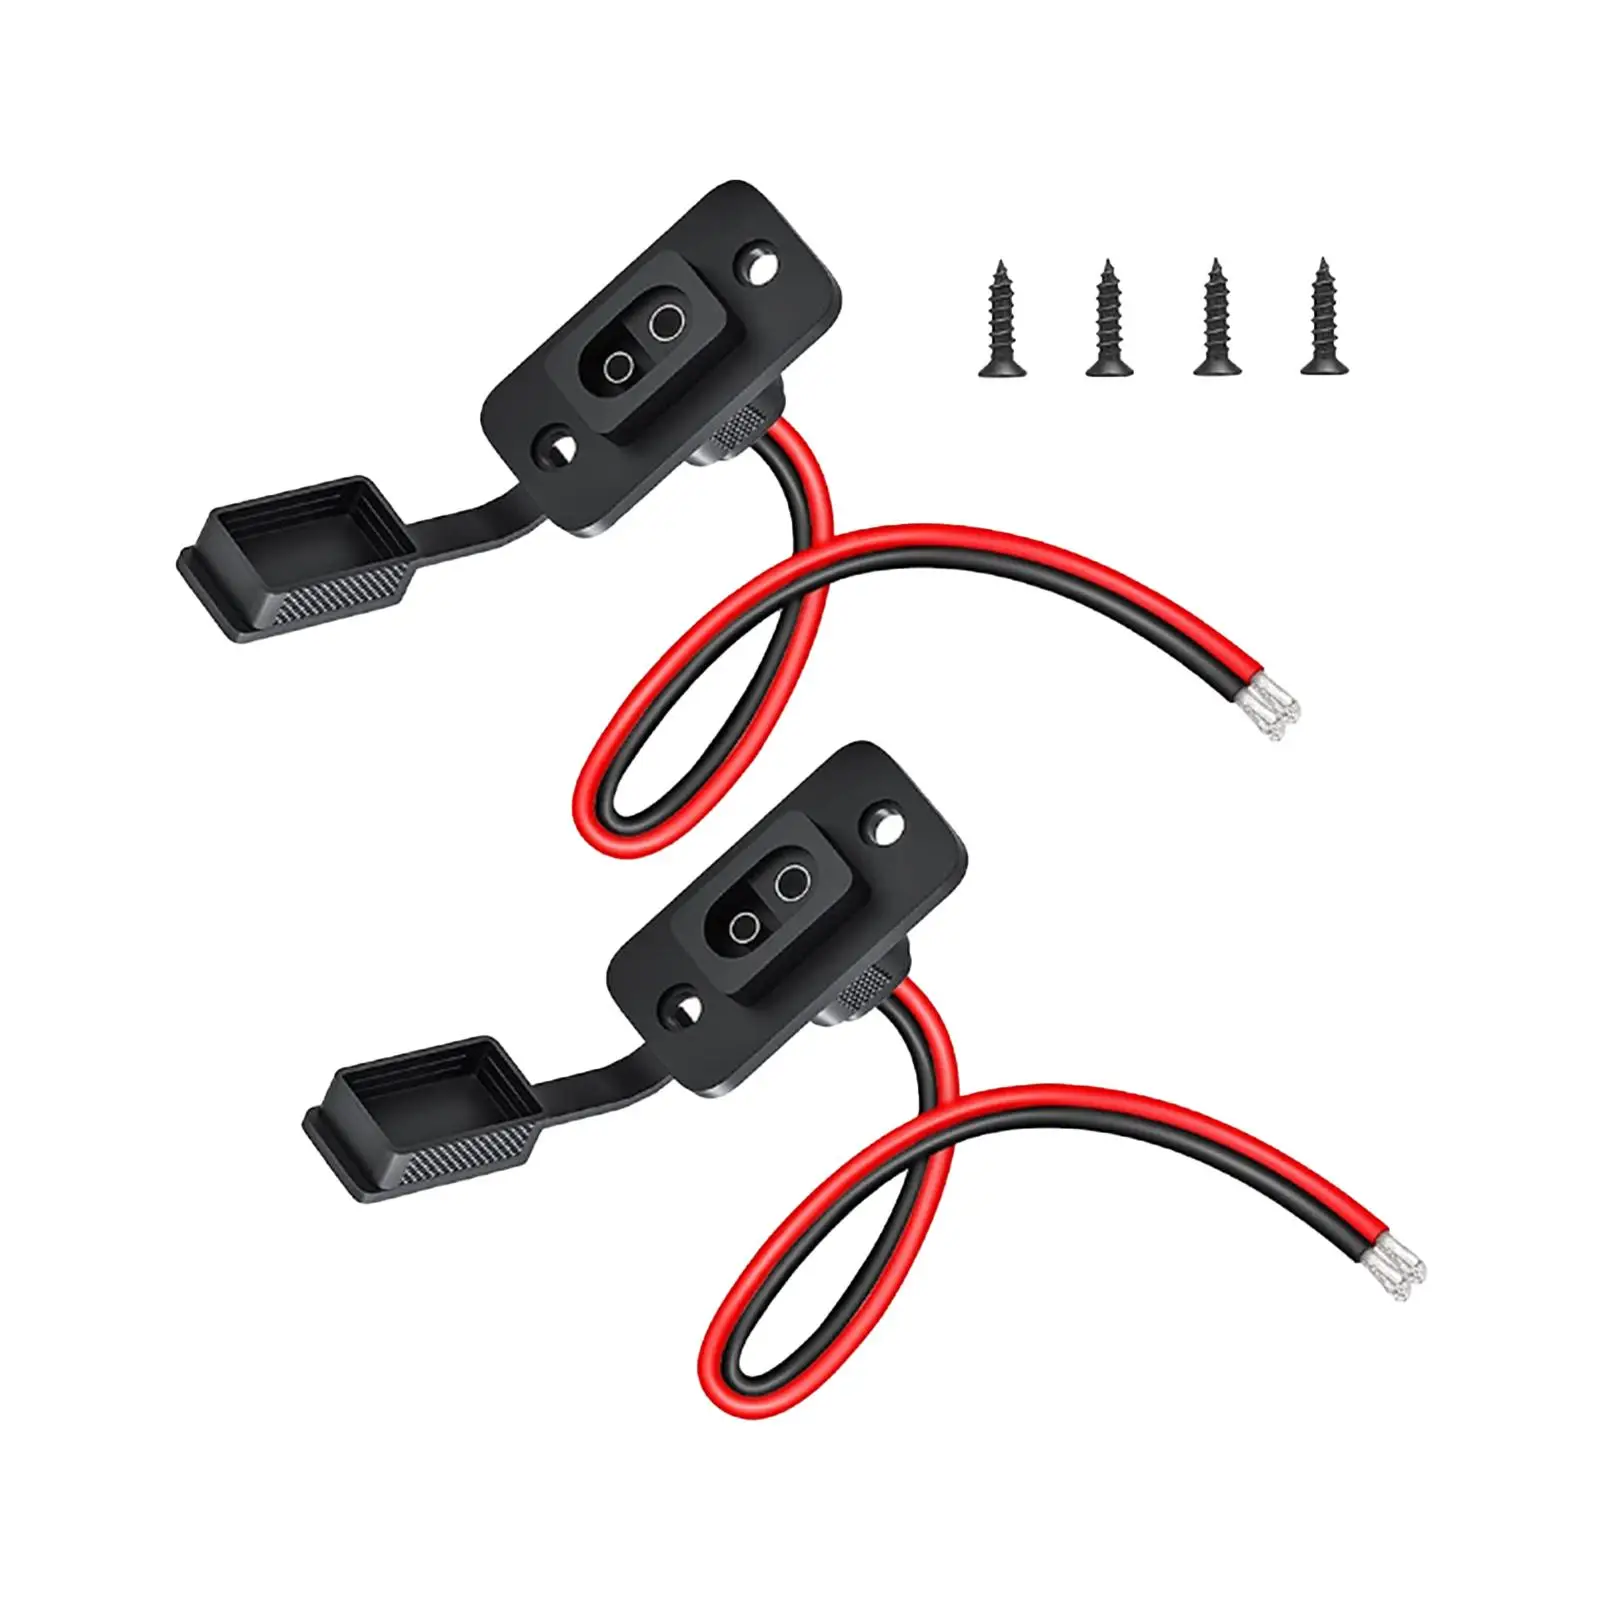 2x SAE Socket Cable Connector Tractor Boats Flush-mountable Extension Cord